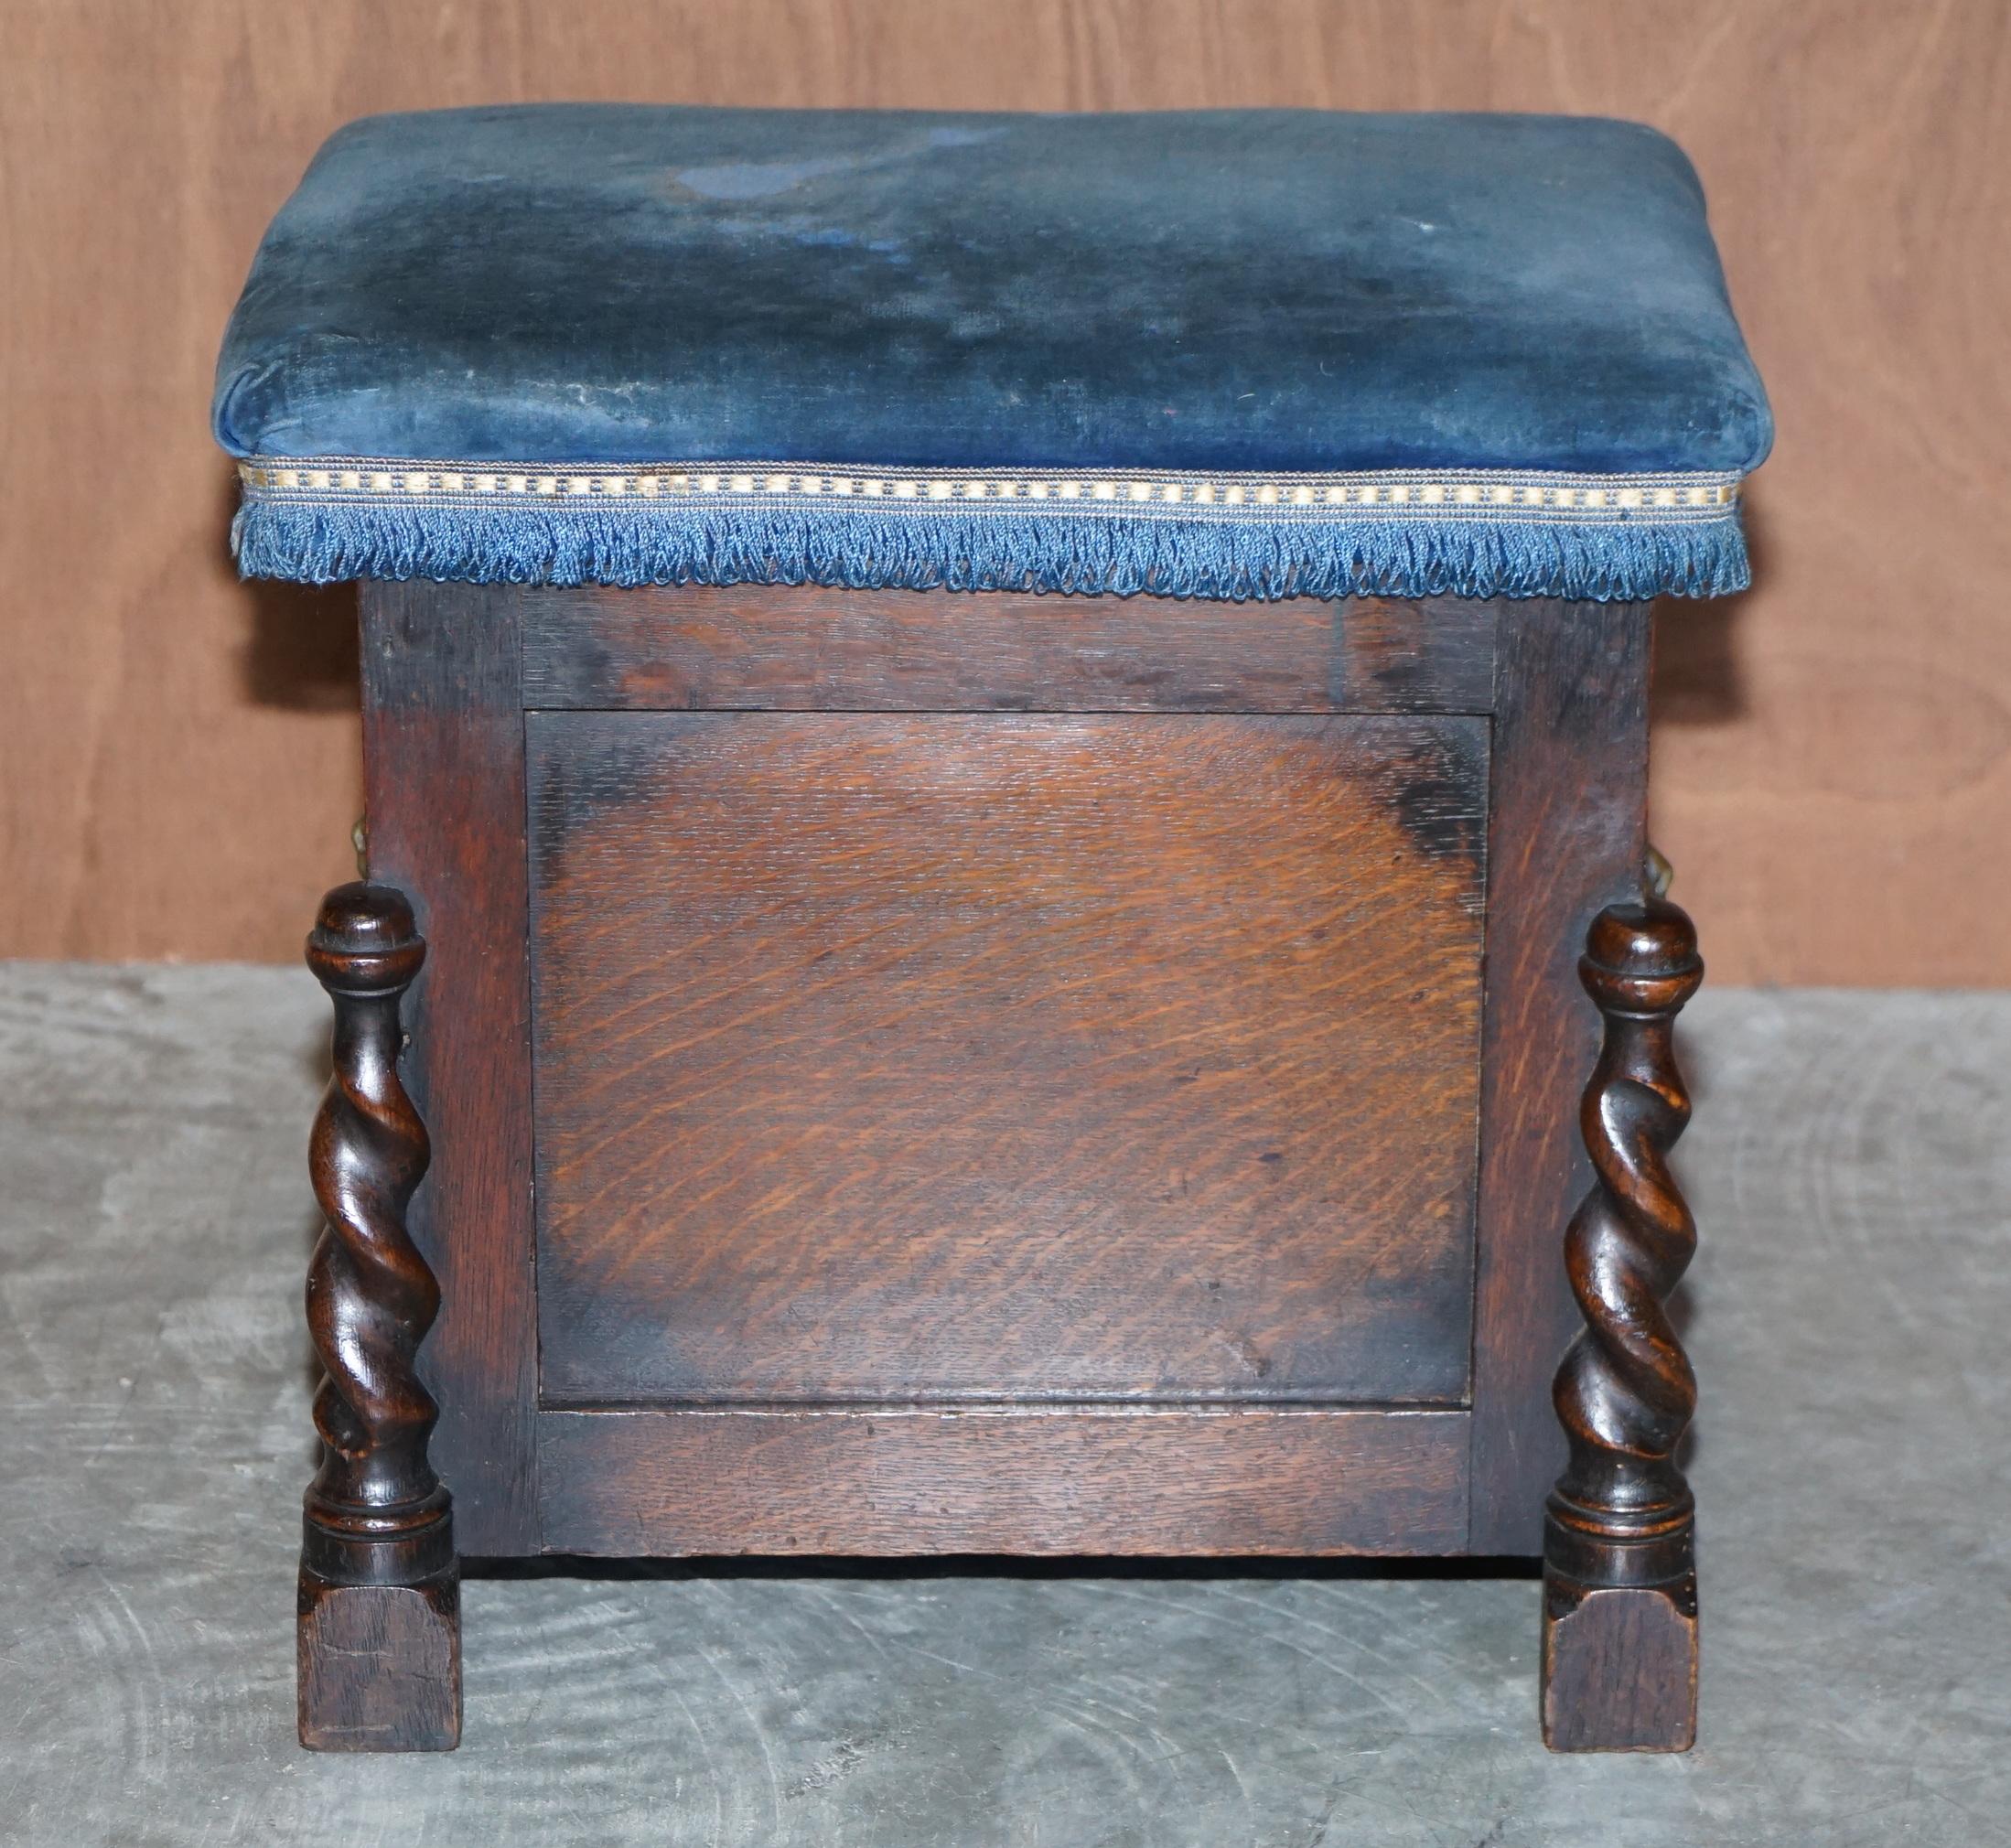 We are delighted to offer for sale this nice antique hand made in England oak footstool with Lions head handles and Regency Blue velvet top

A very well made and decorative piece, it looks smart and elegant in any setting, the fabric is Royal